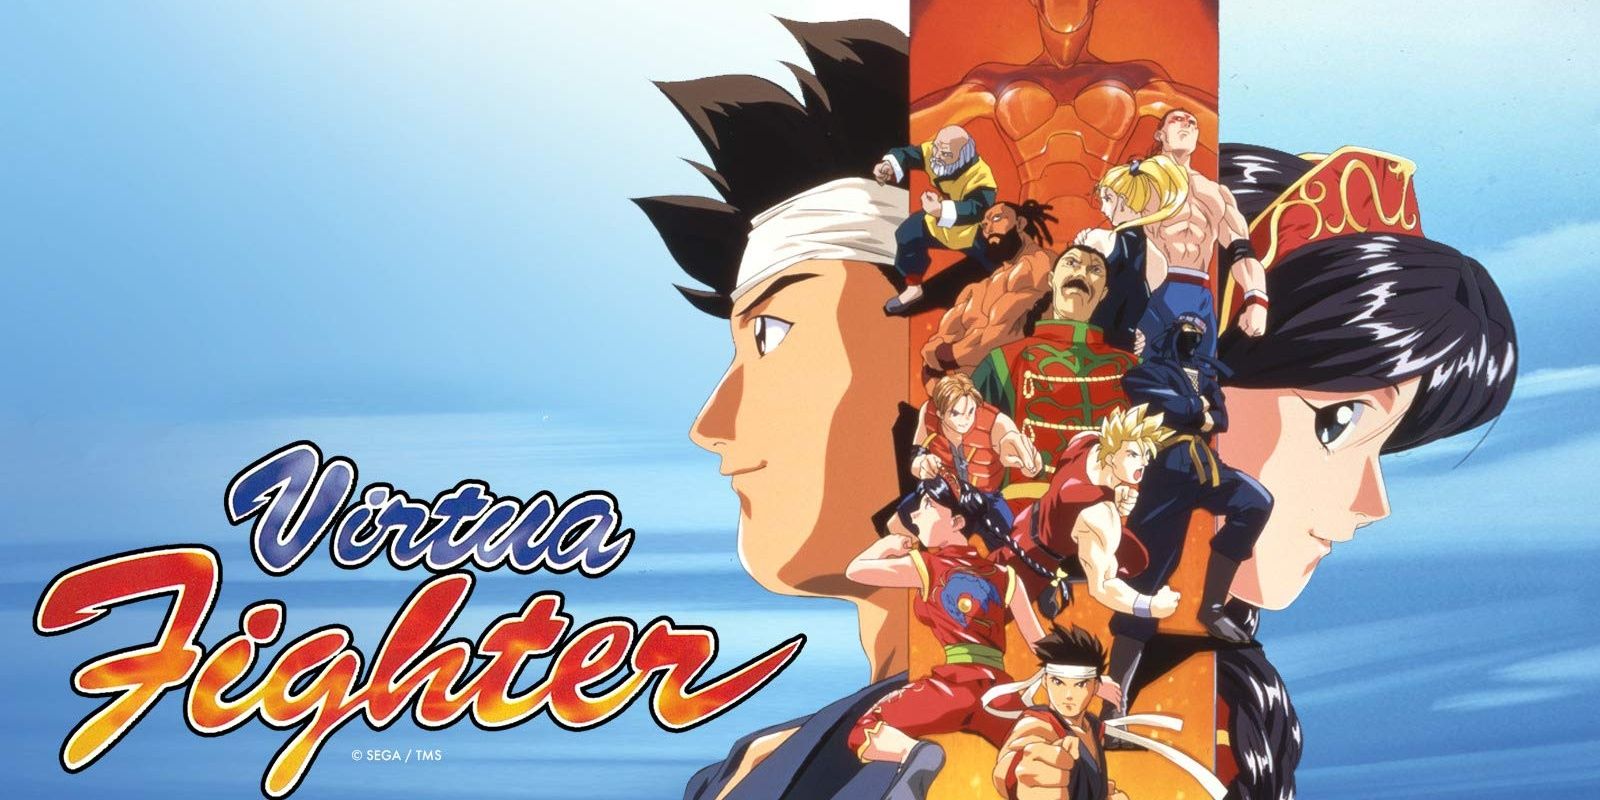 The poster for Virtua Fighter anime series with the characters in fighting poses